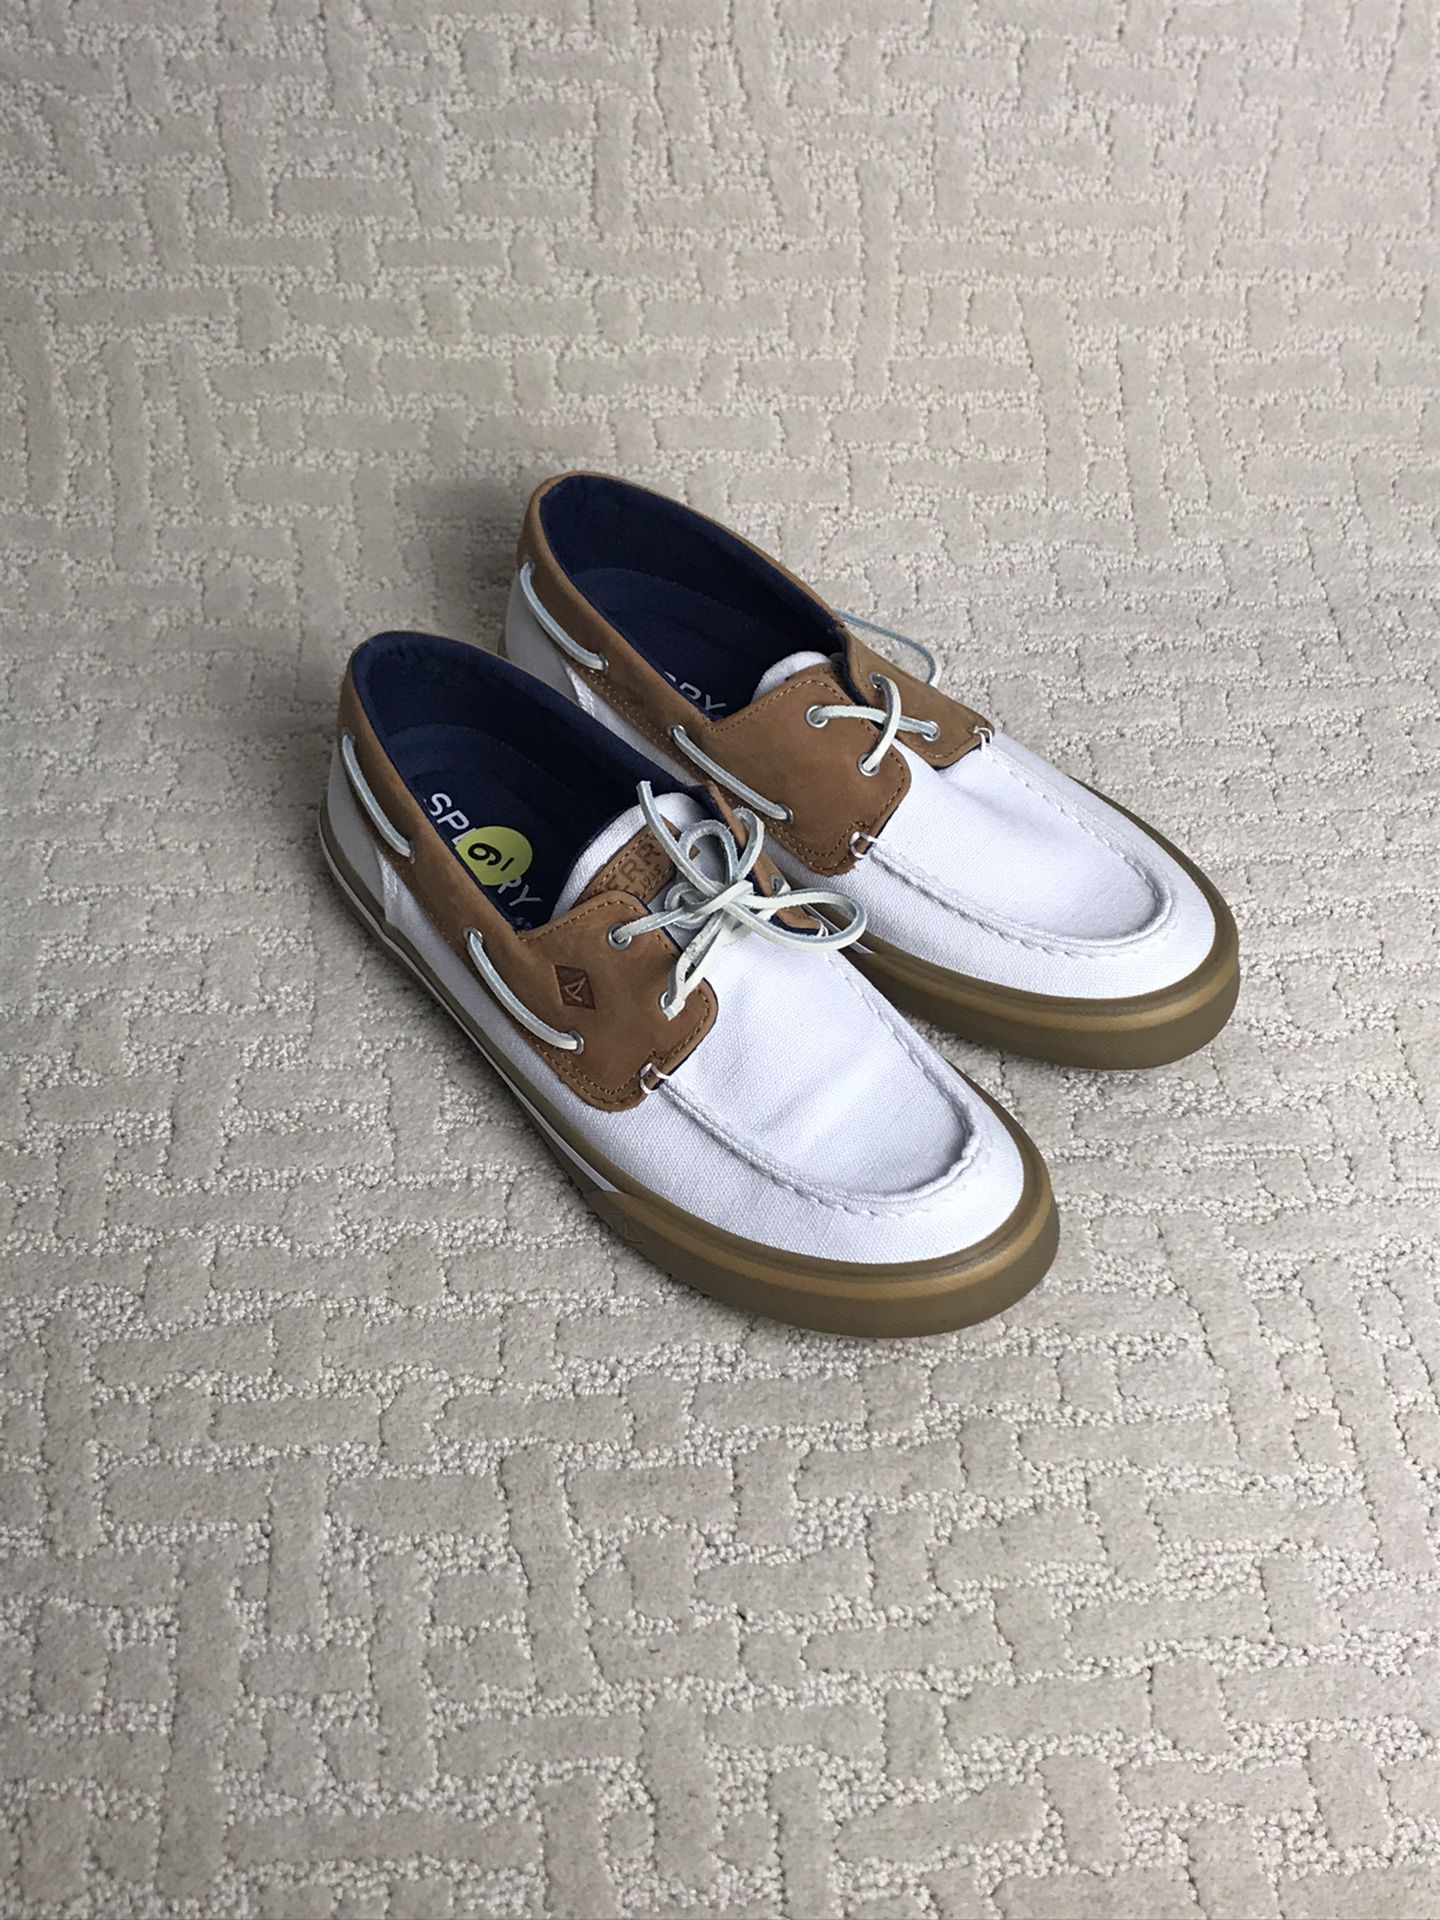 SPERRY TOP-SIDER MEN'S BAHAMA II BOAT SHOE (SIZE 9) Sts18296 Brand New No Box